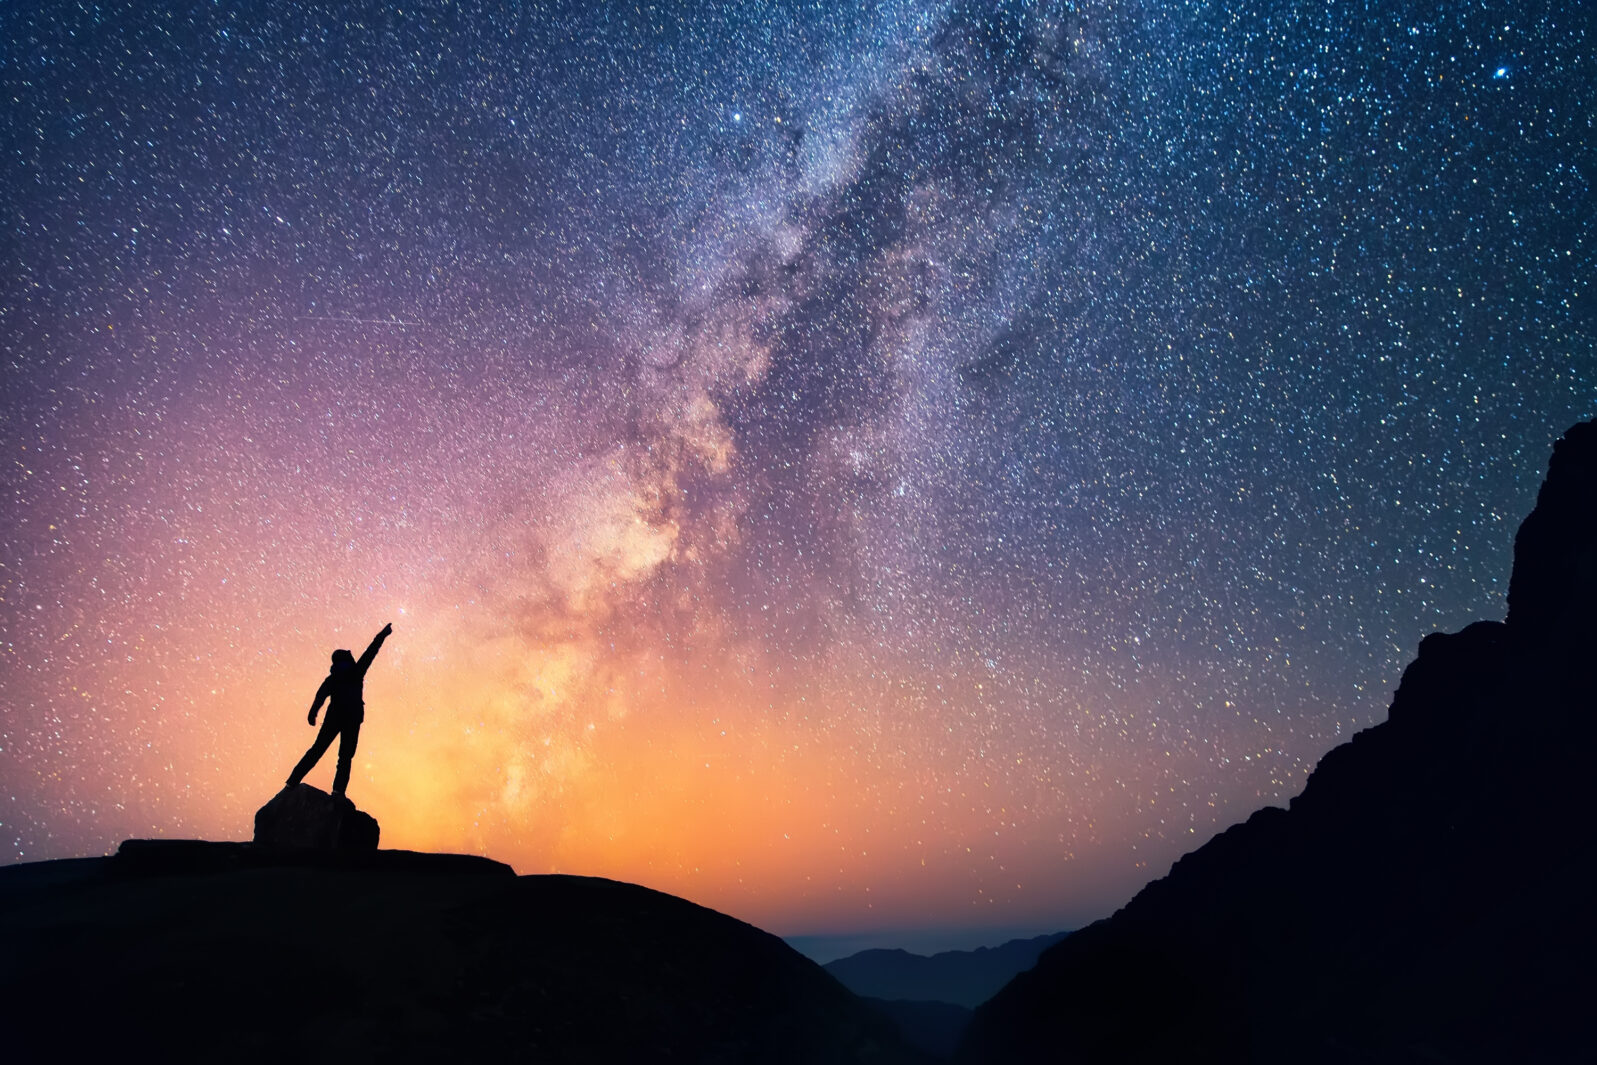 Catch the star. A person is standing next to the Milky Way galaxy pointing on a bright star.